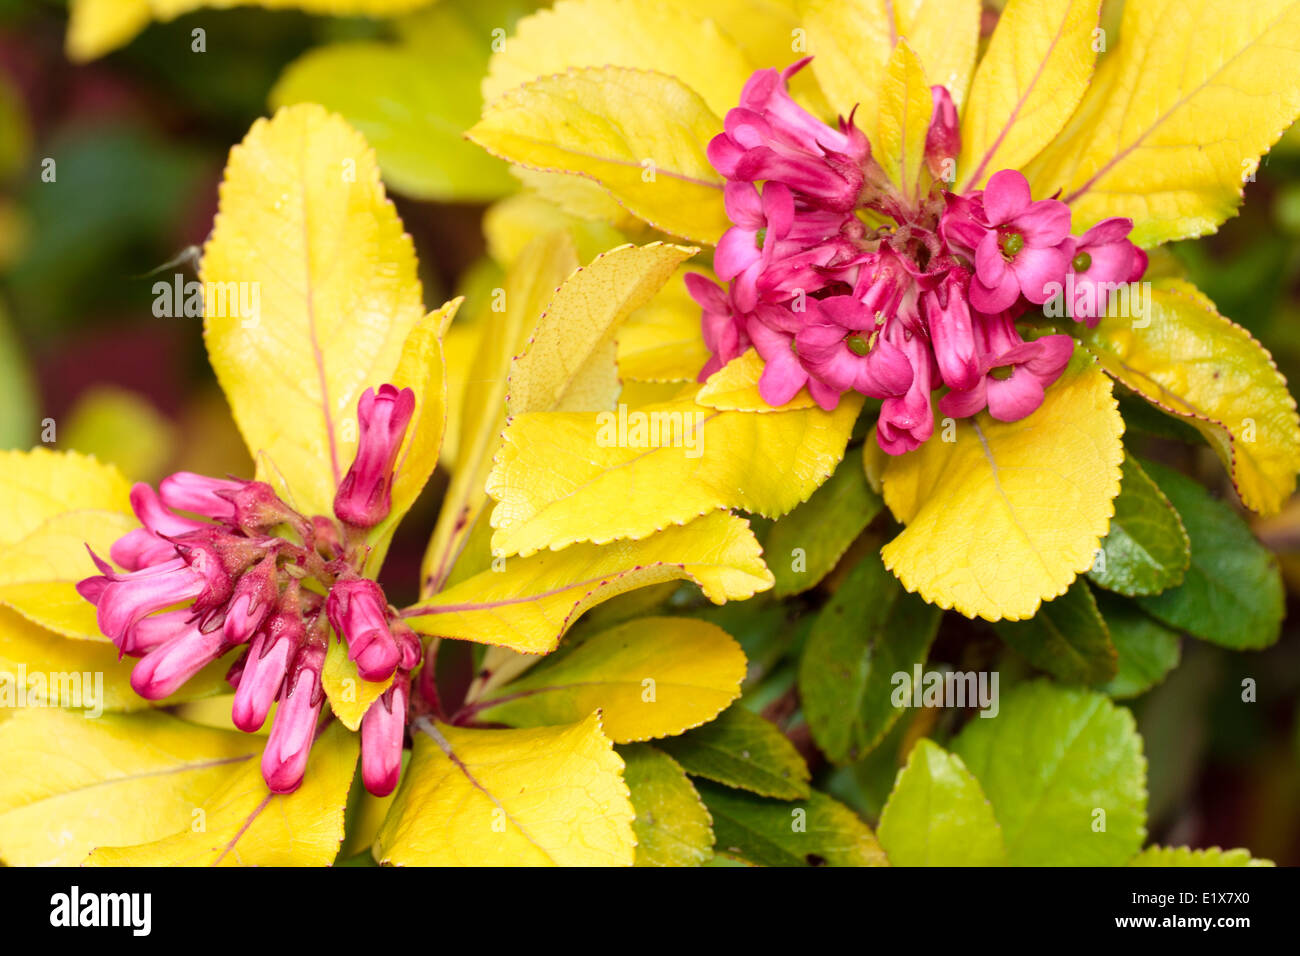 Pink And Gold Flowers Stock Photos Pink And Gold Flowers Stock